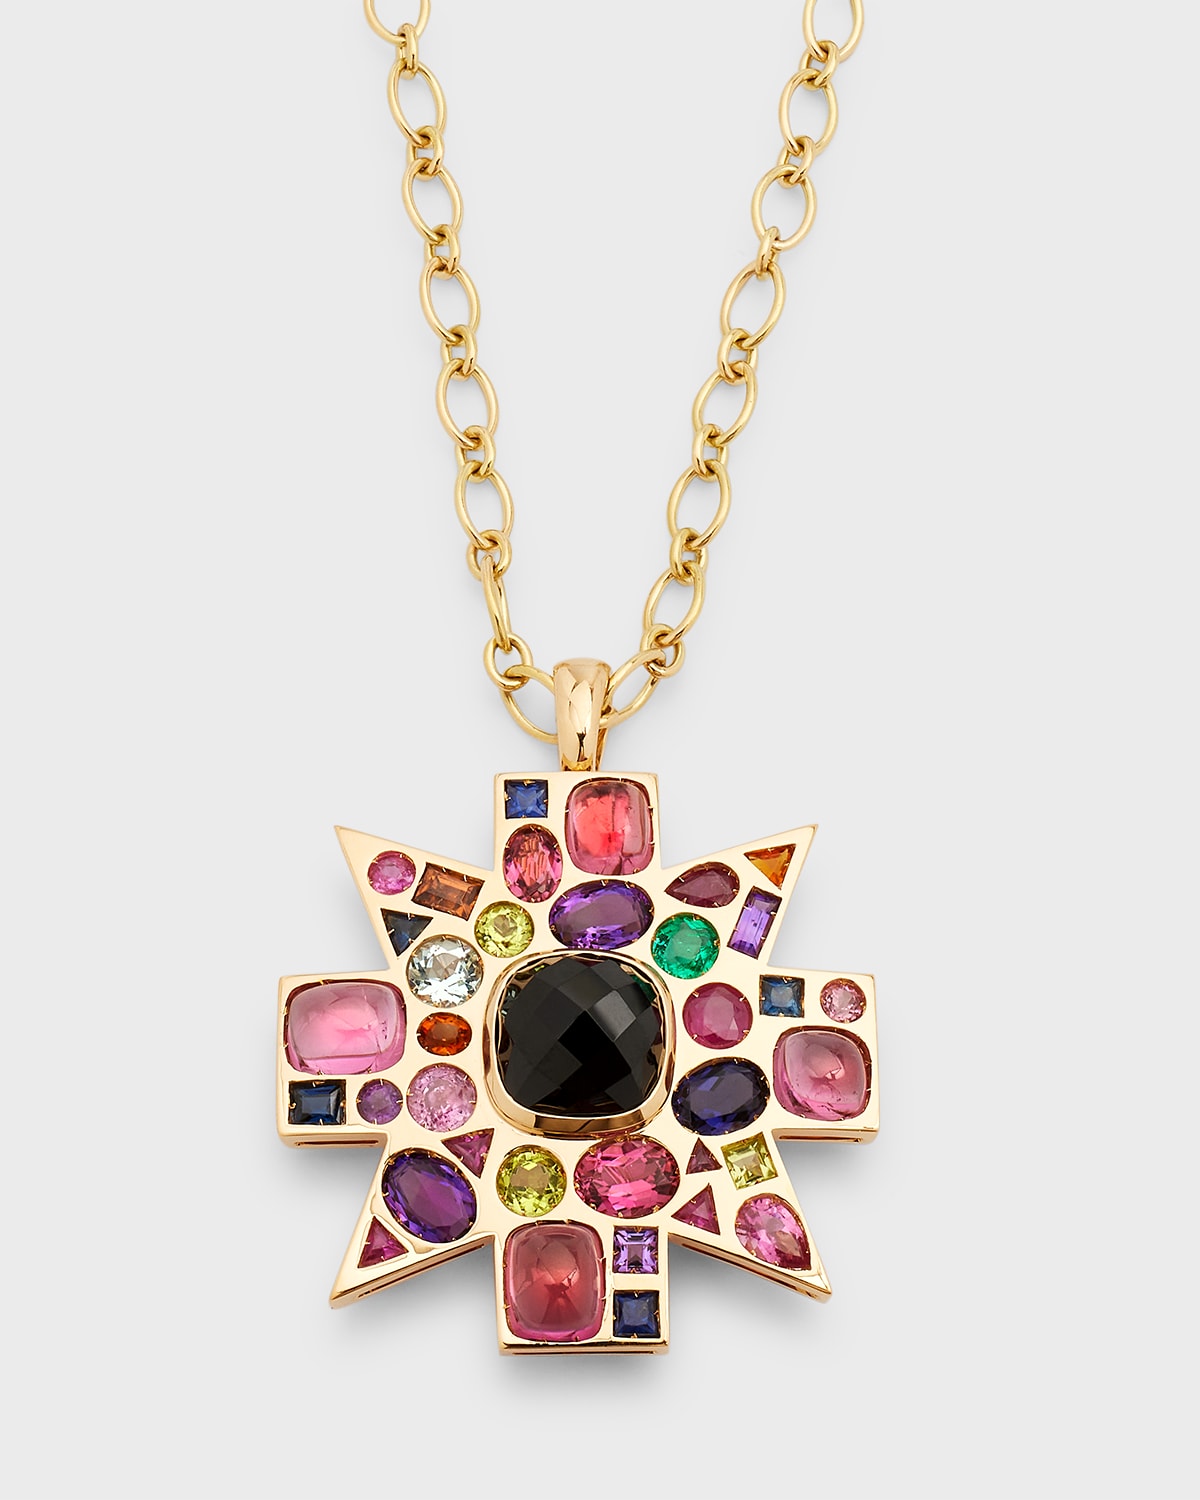 18K Yellow Gold Black Spinel, Rubellite and Colored Stone Byzantine Pendant-Brooch Necklace